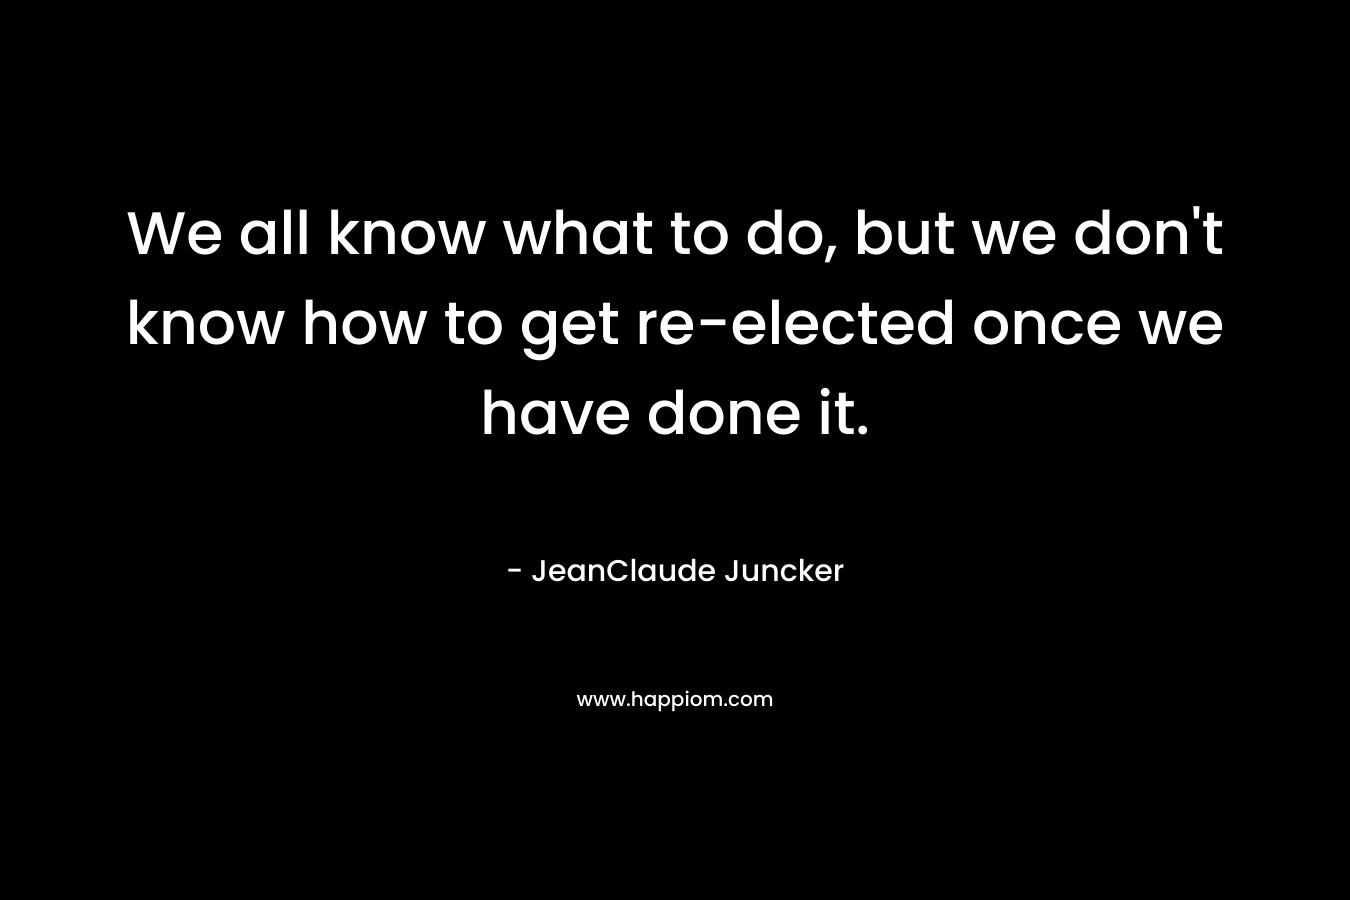 We all know what to do, but we don't know how to get re-elected once we have done it.